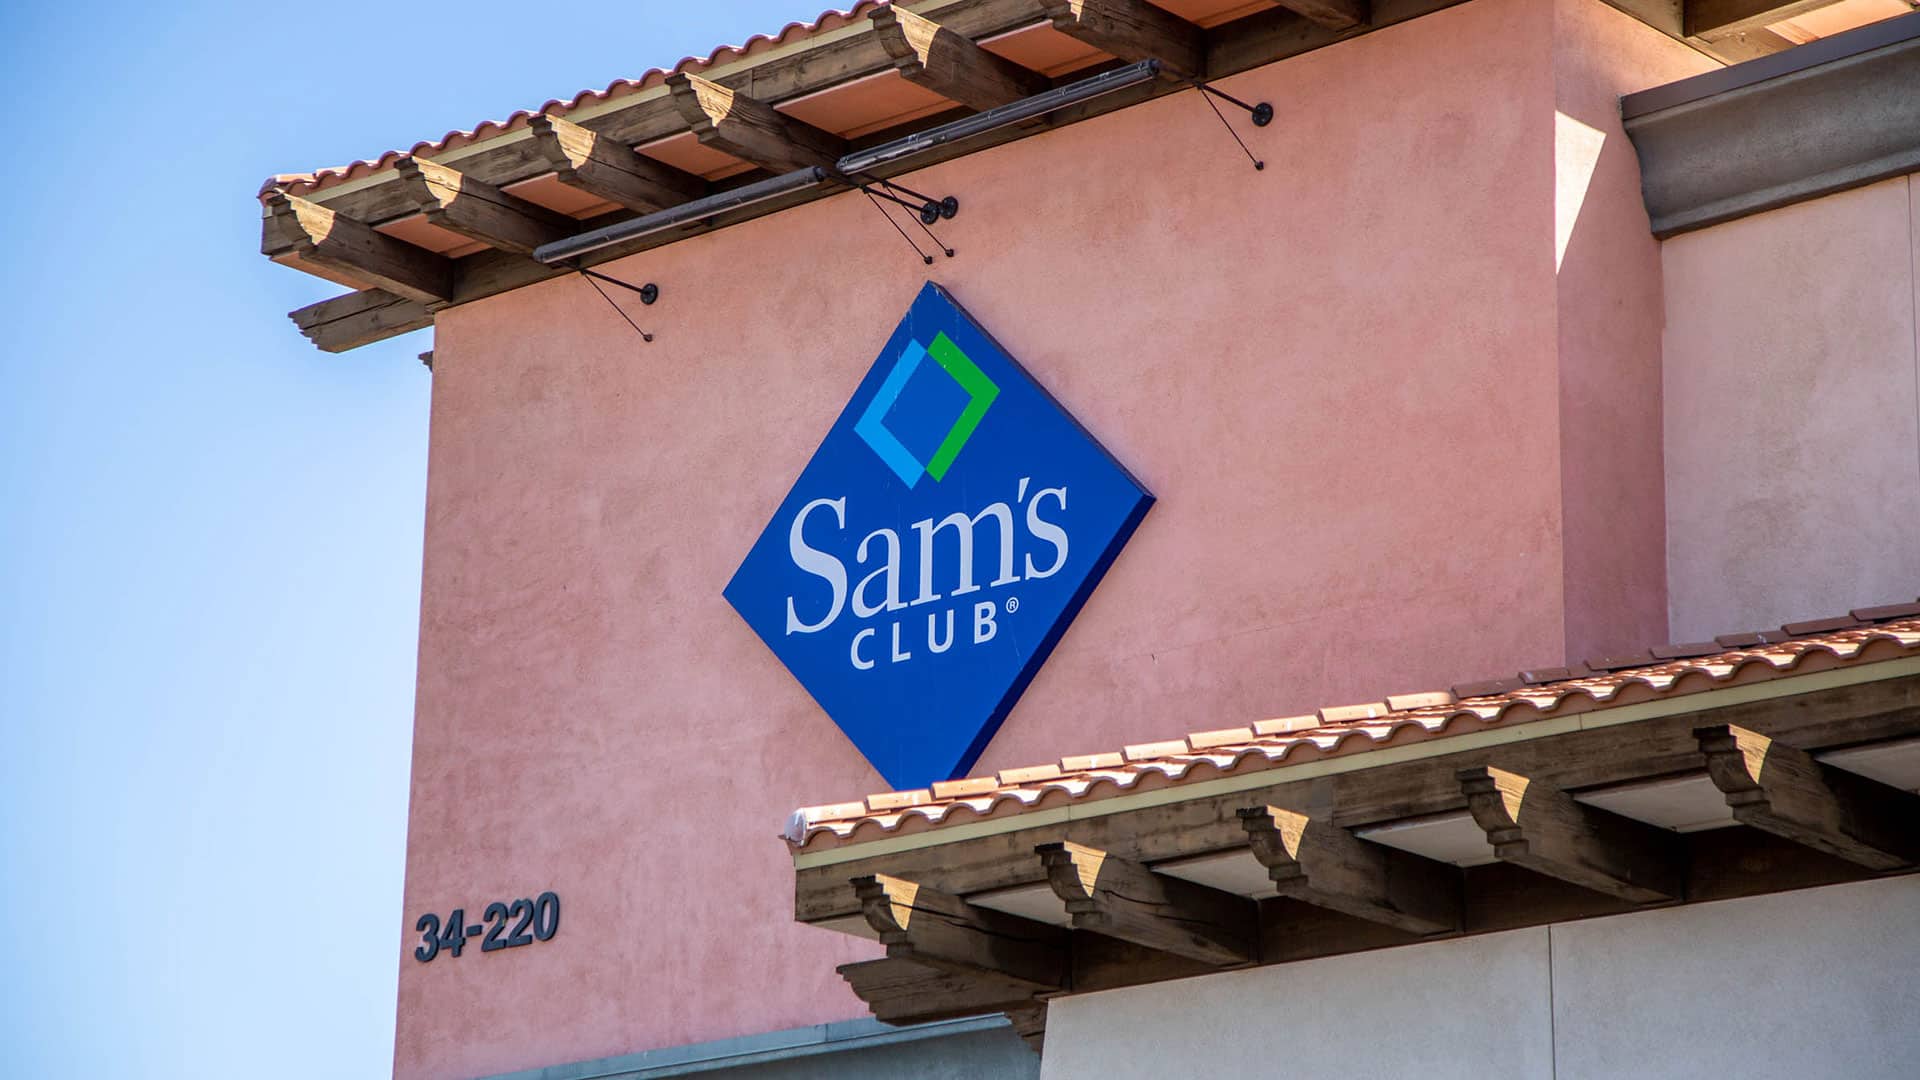 5 Ways To Shop at Sam's Club Without a Membership